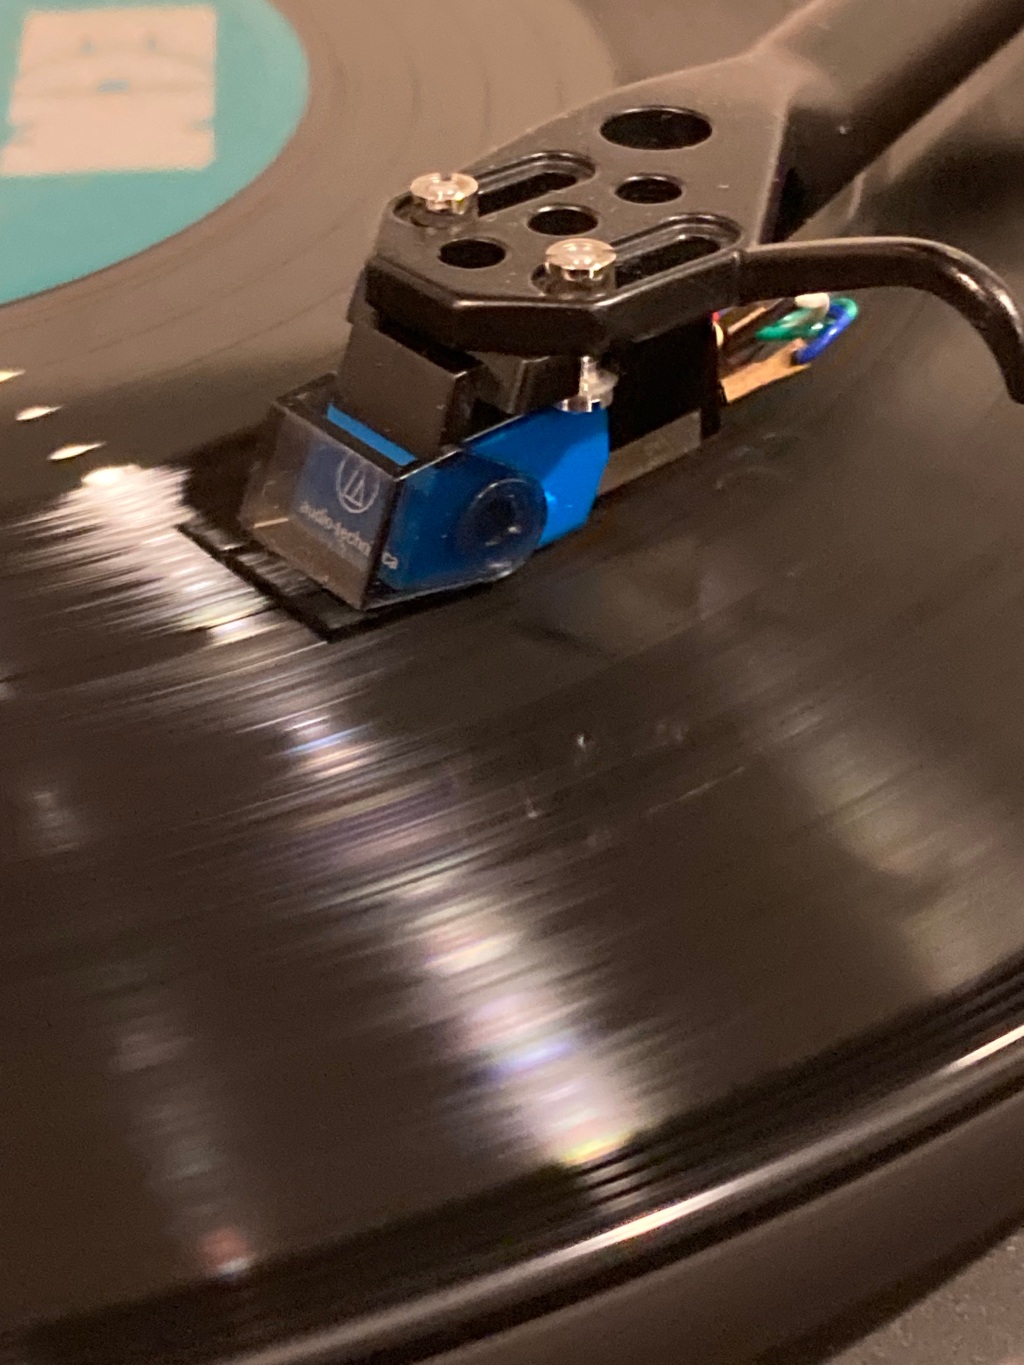 Phono Cartridge Review: The Forgotten Audio Technica AT-110E